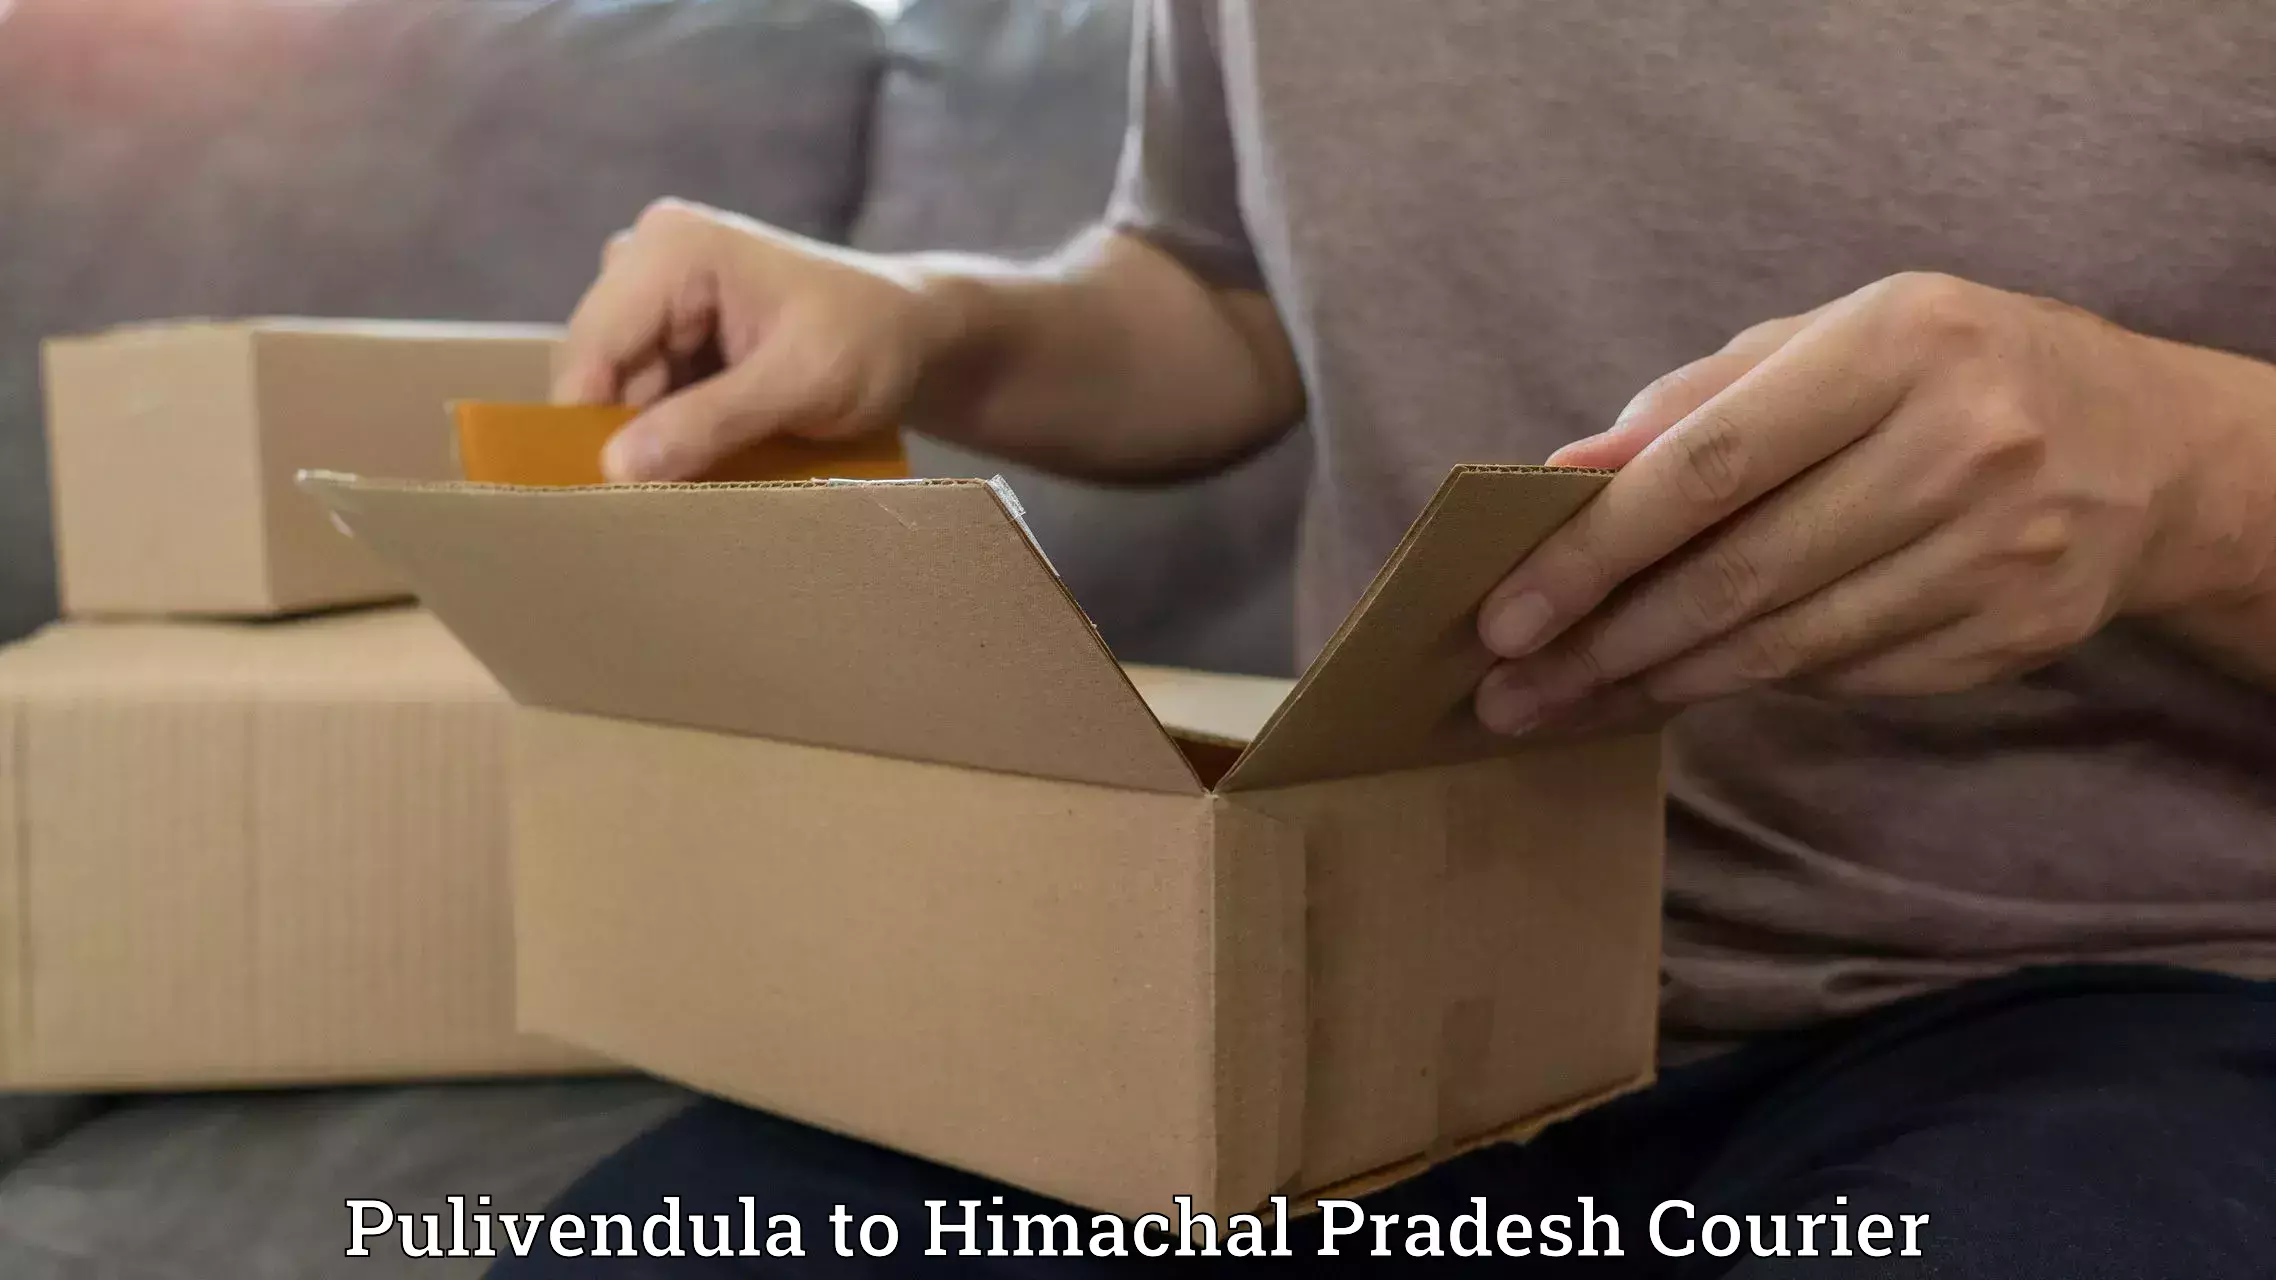 Full-service courier options Pulivendula to Himachal Pradesh